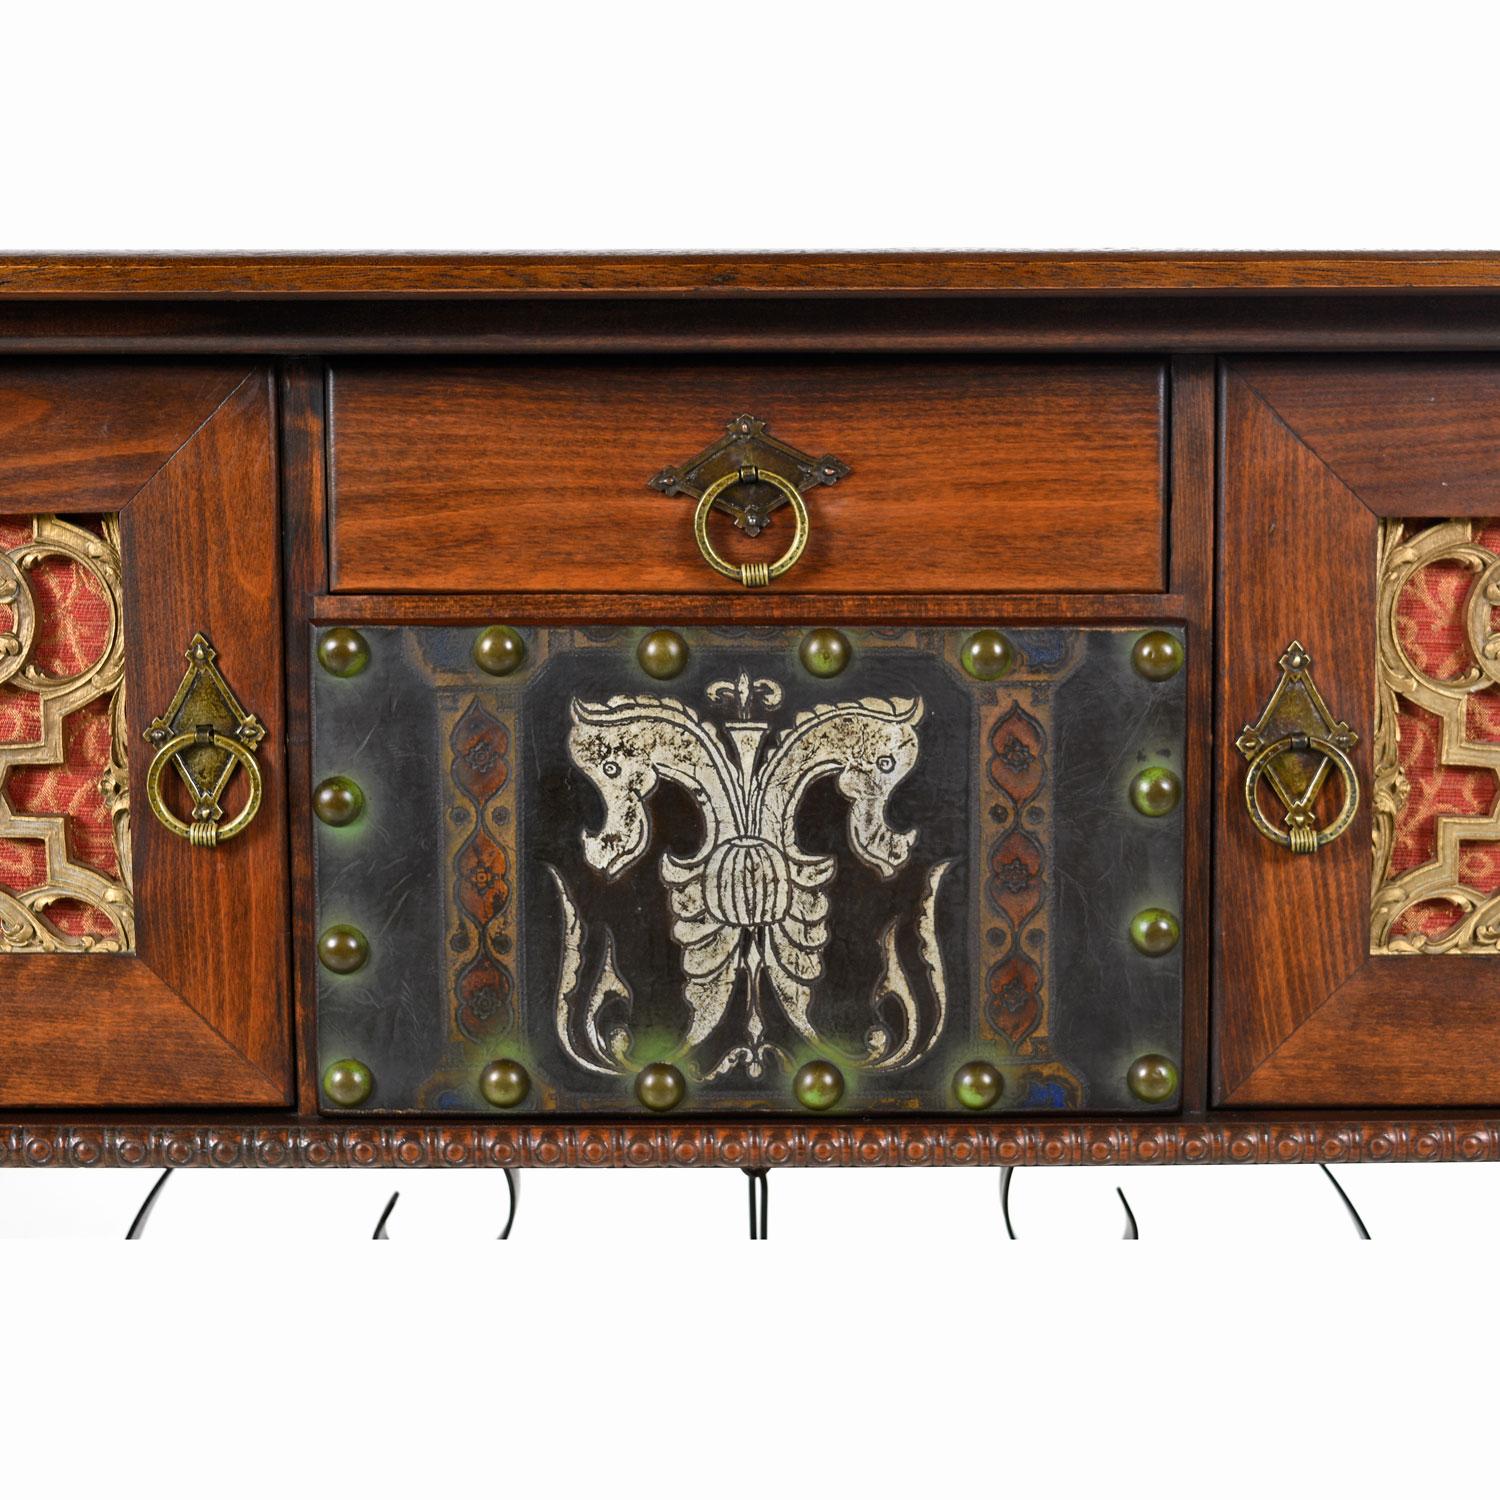 Late 20th Century Gothic Revival Style Dragon Motif Brass and Leather Accent Mahogany Oak Credenza